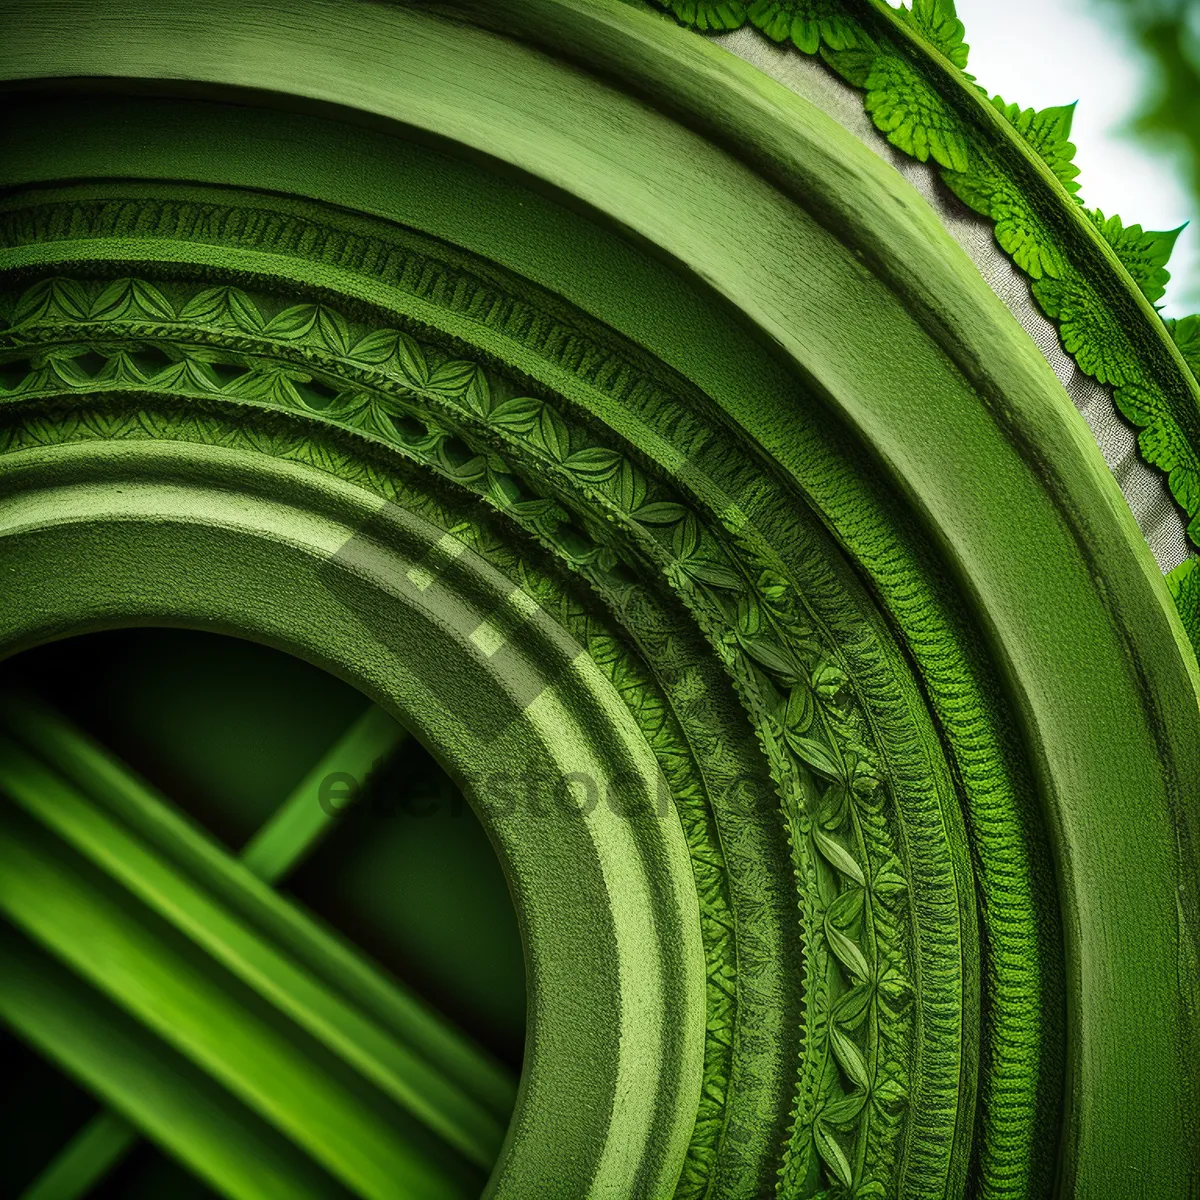 Picture of Coiled Tire Hoop: Abstract Digital Art Wallpaper